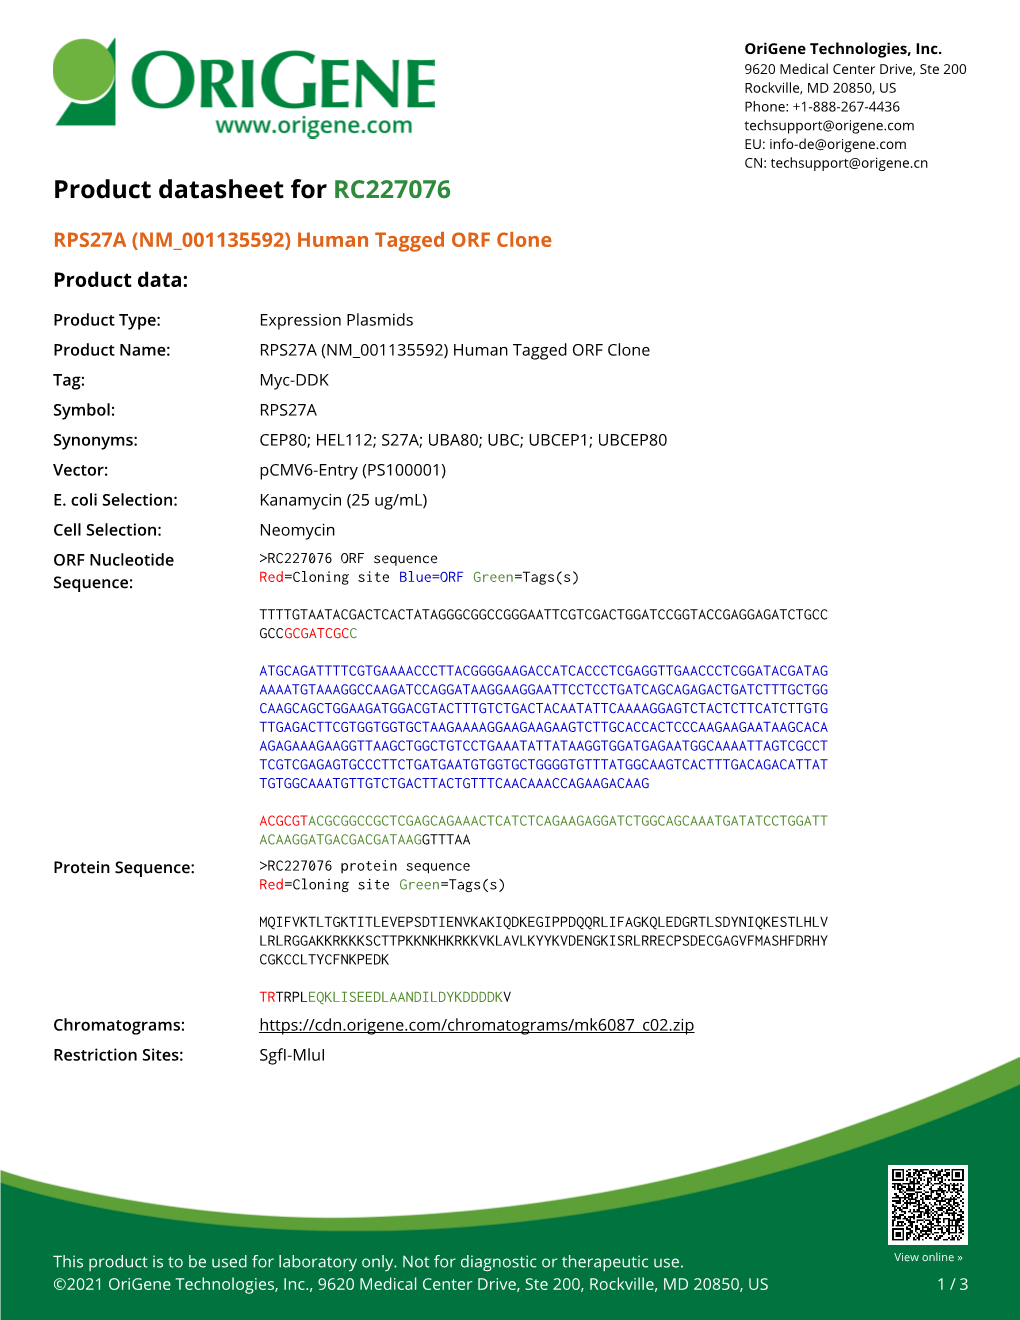 RPS27A (NM 001135592) Human Tagged ORF Clone Product Data